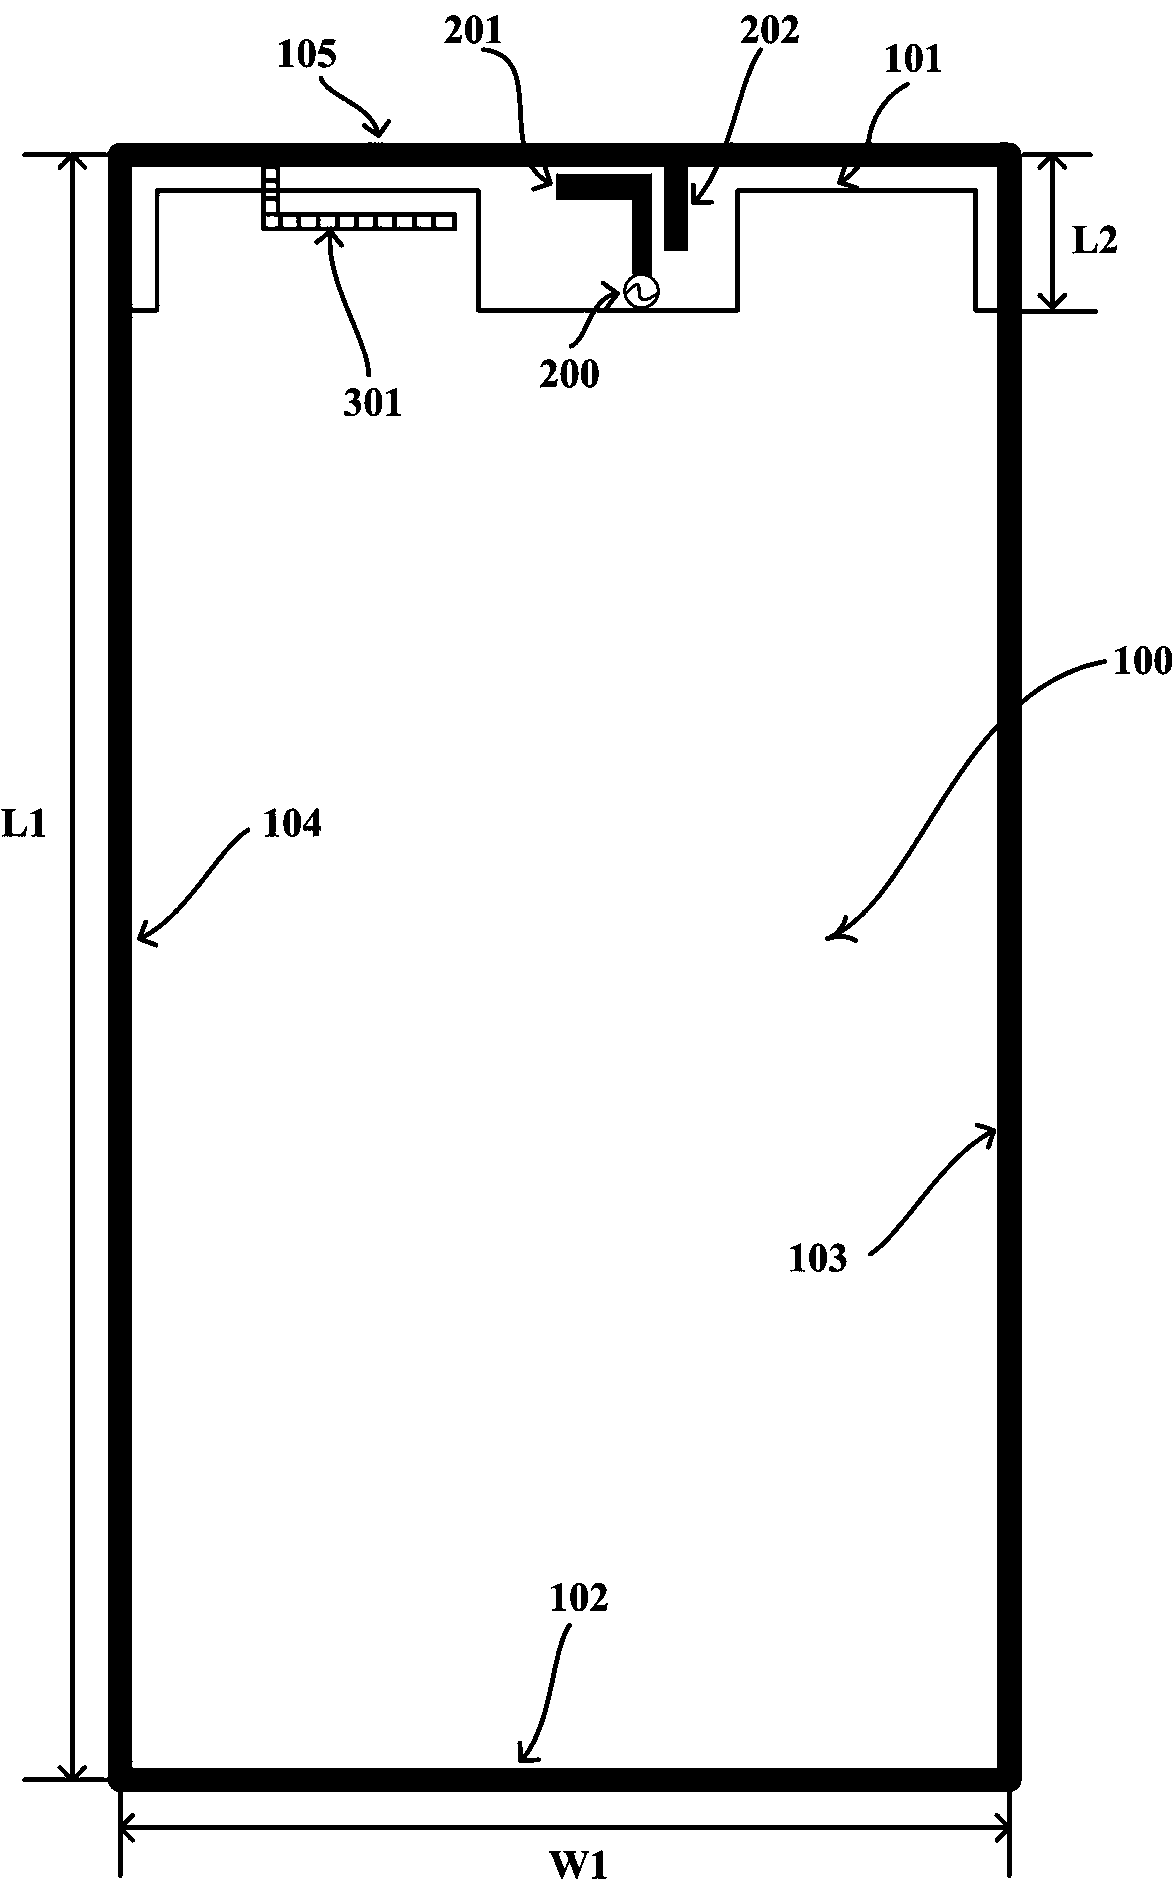 Double-frequency coupled antenna with metal frame